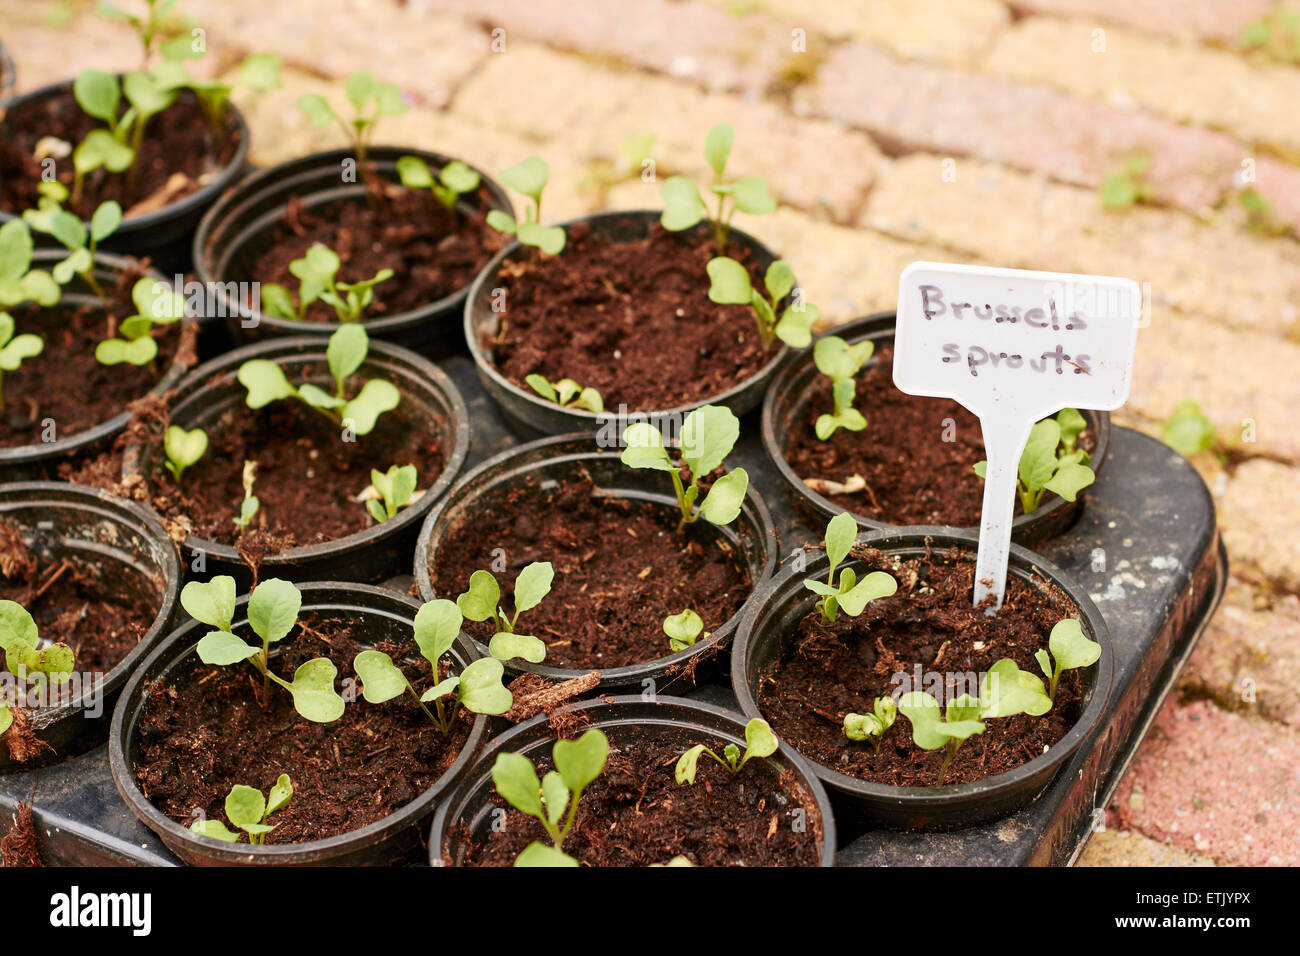 Brussels sprout seedlings in small pots. Stock Photo